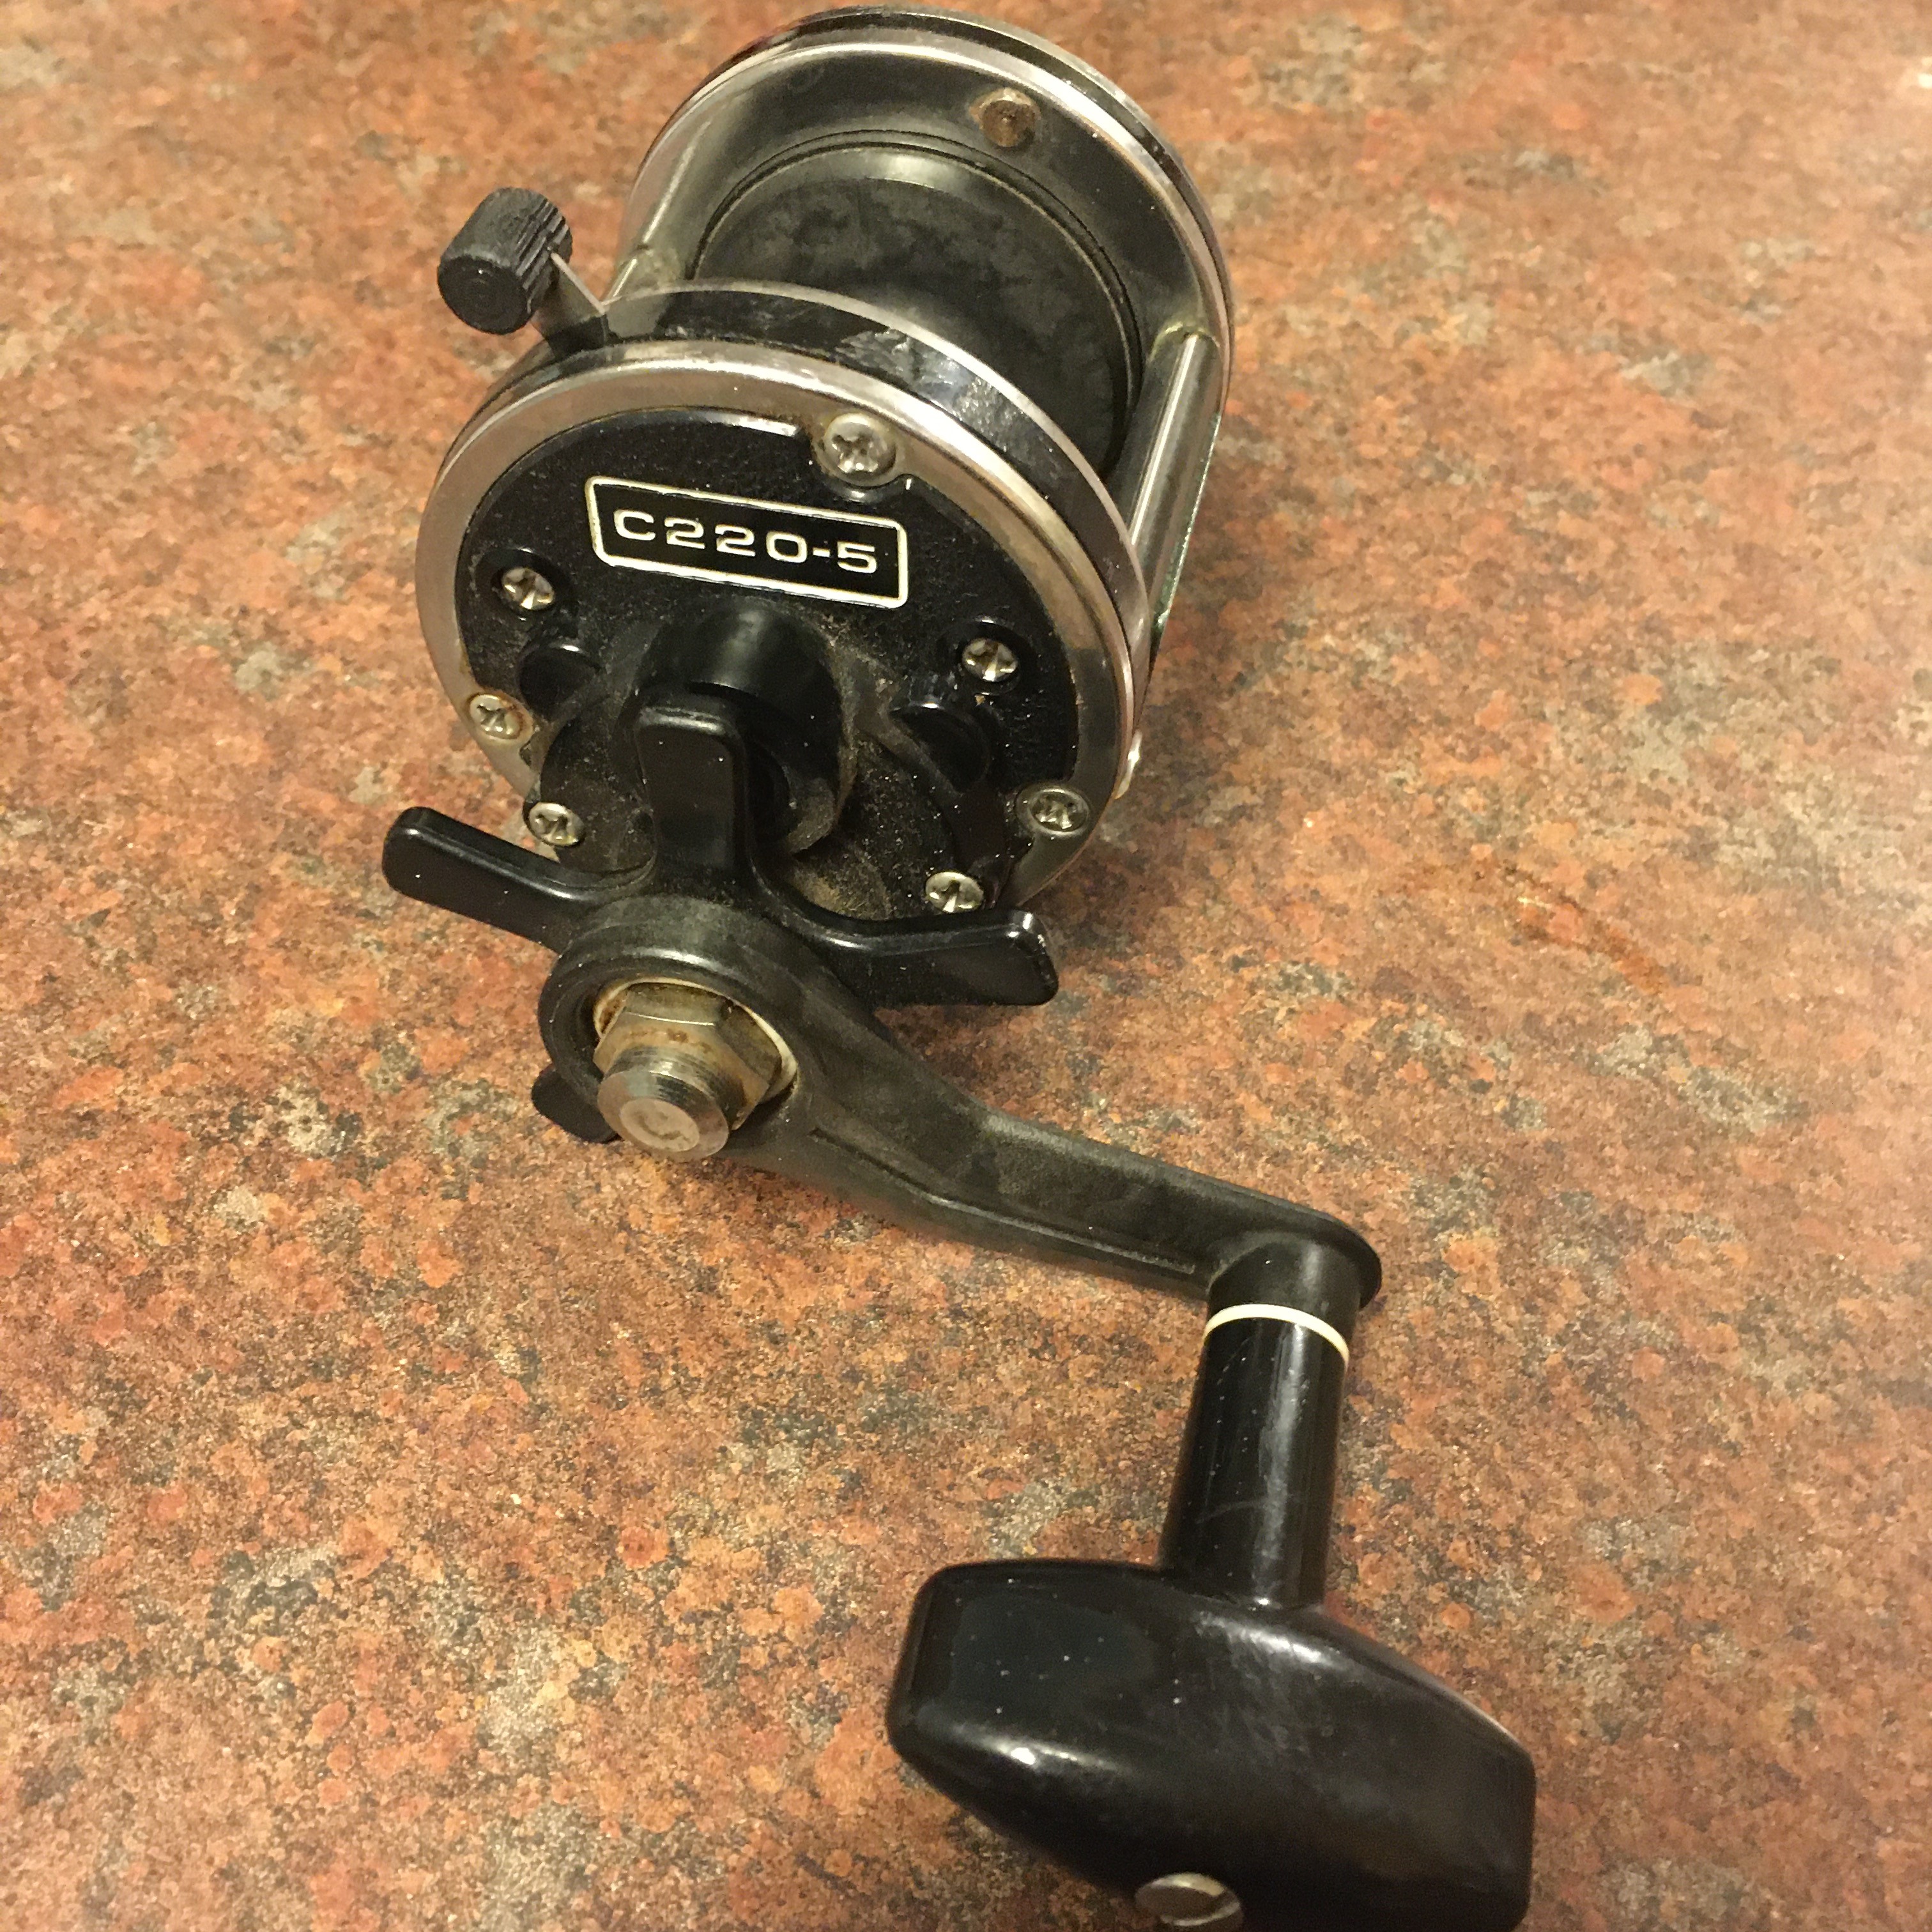 New to Newell reels - C-220-5